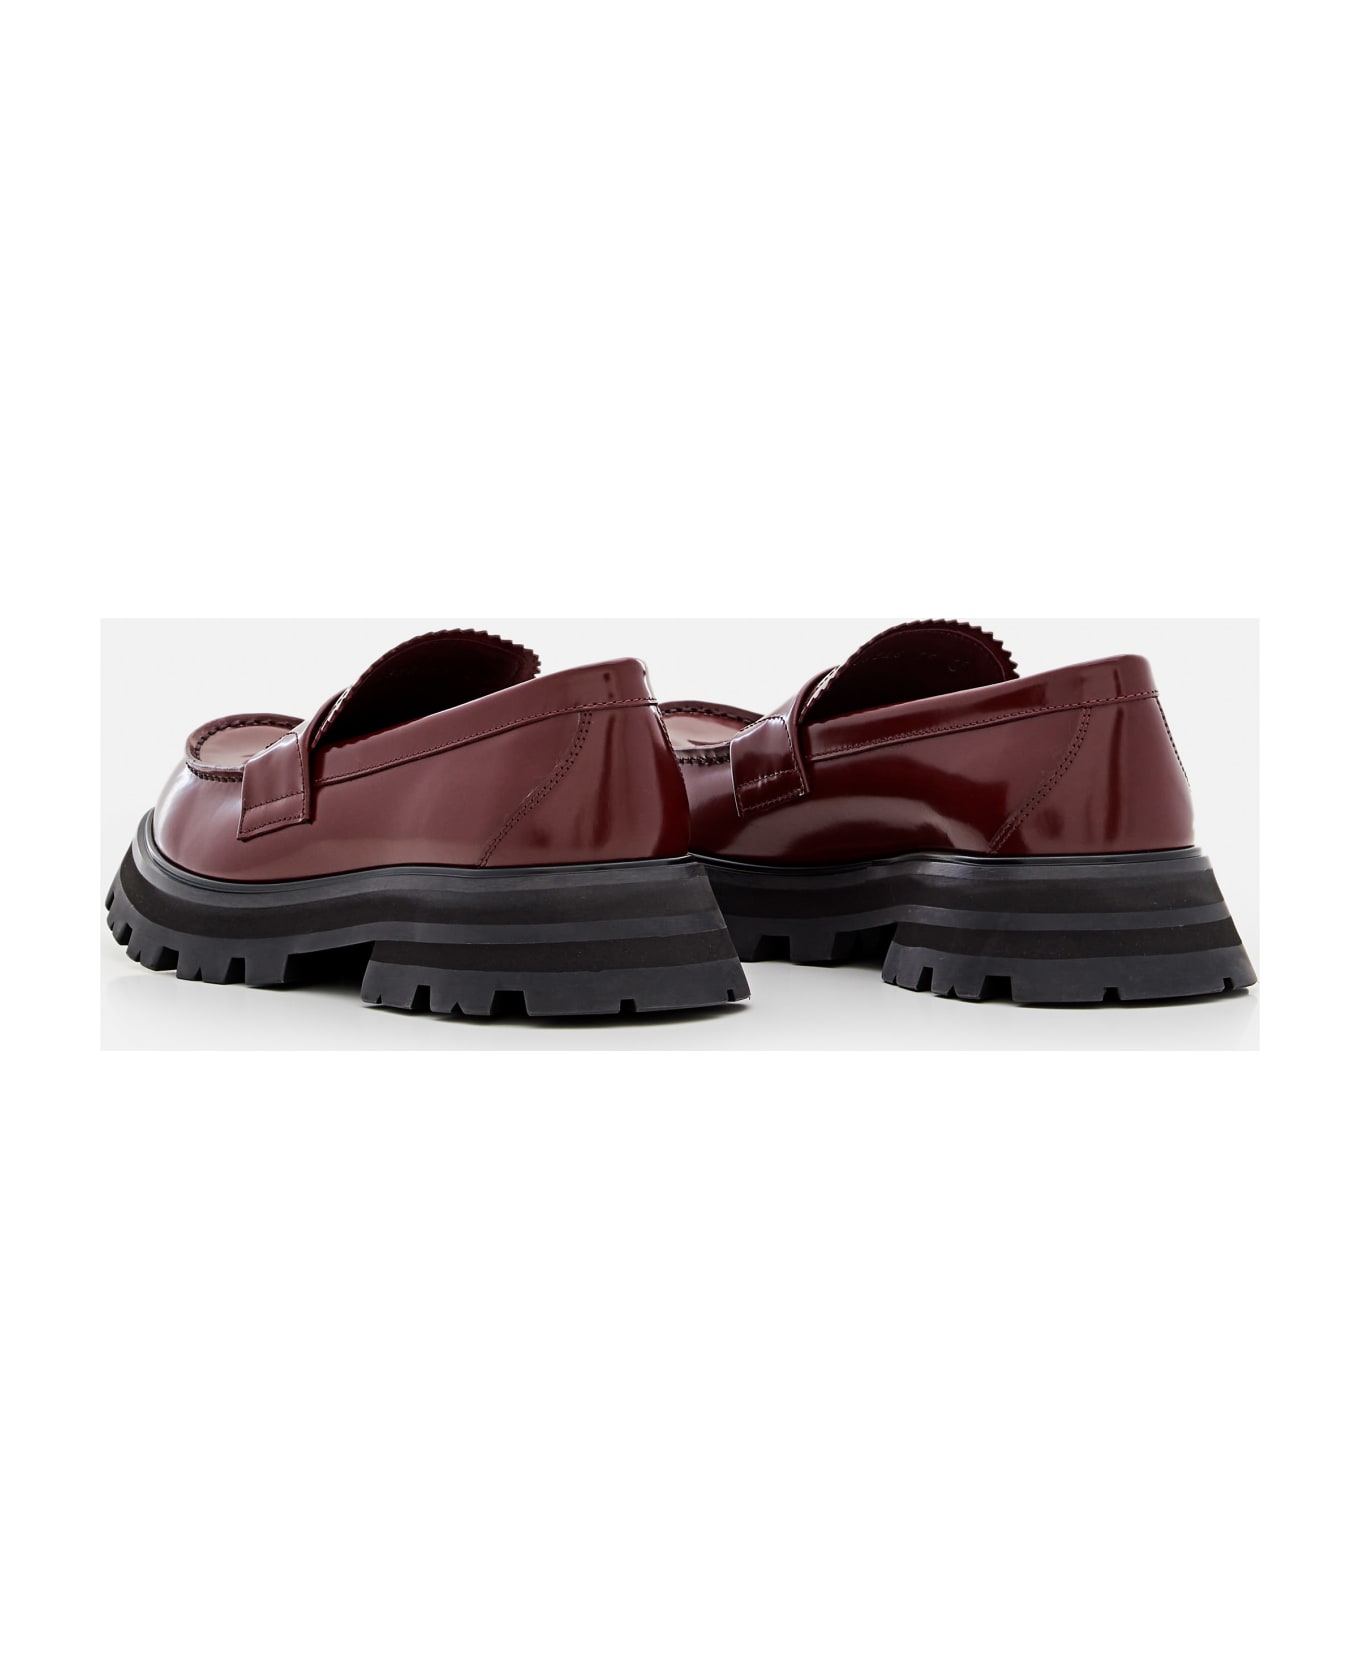 Alexander McQueen Leather Loafers - Red フラットシューズ